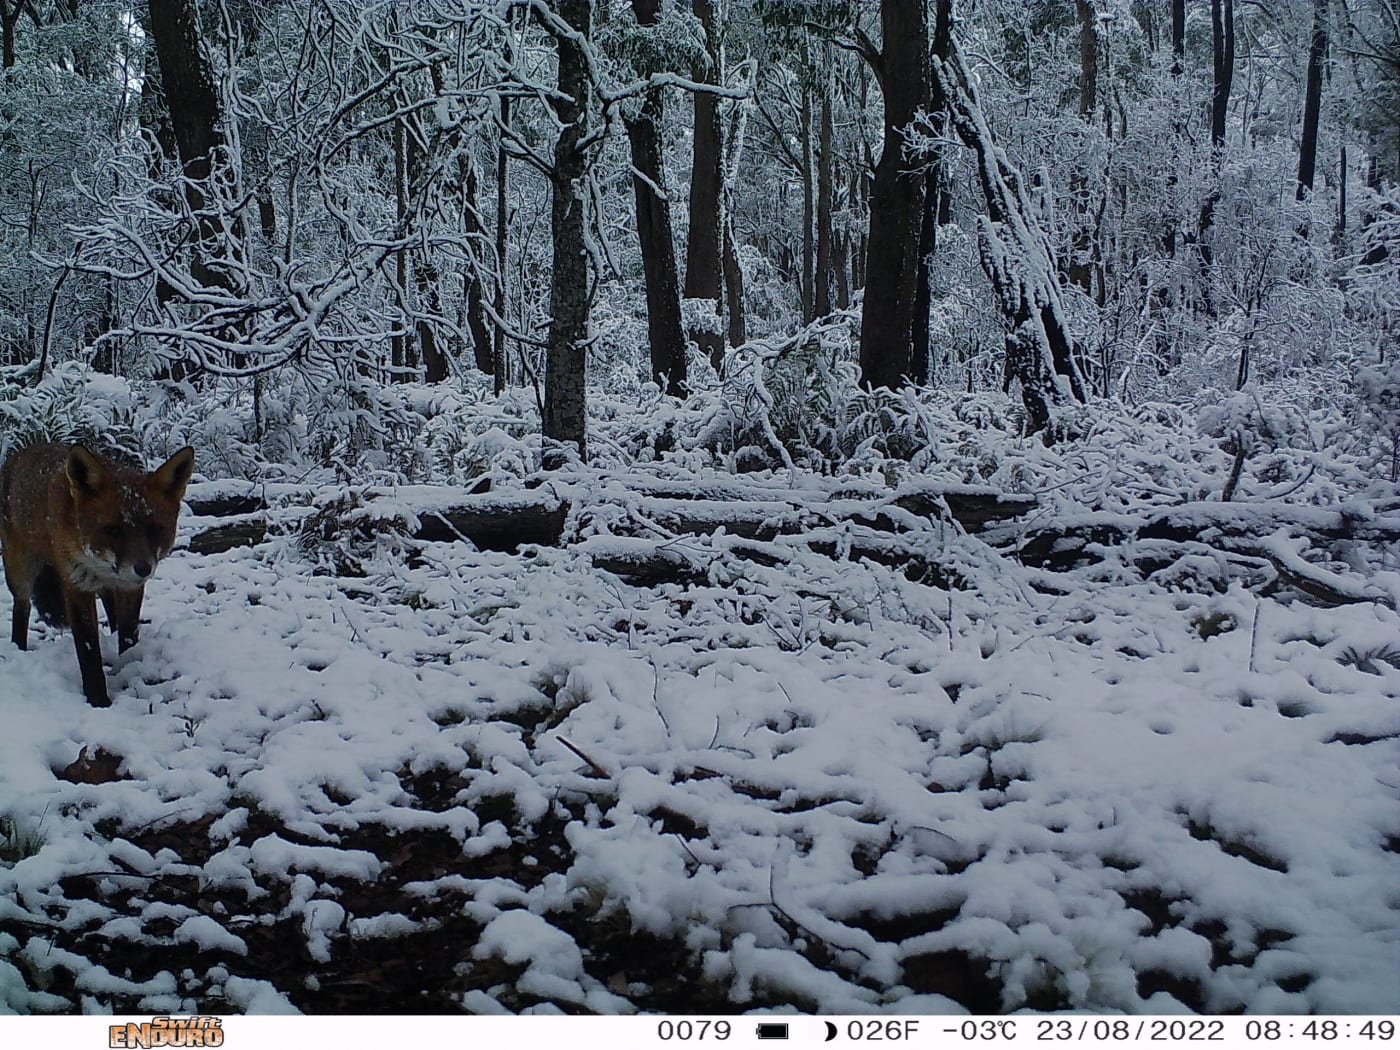 Cameras capture a red fox in the snow in East Gippsland